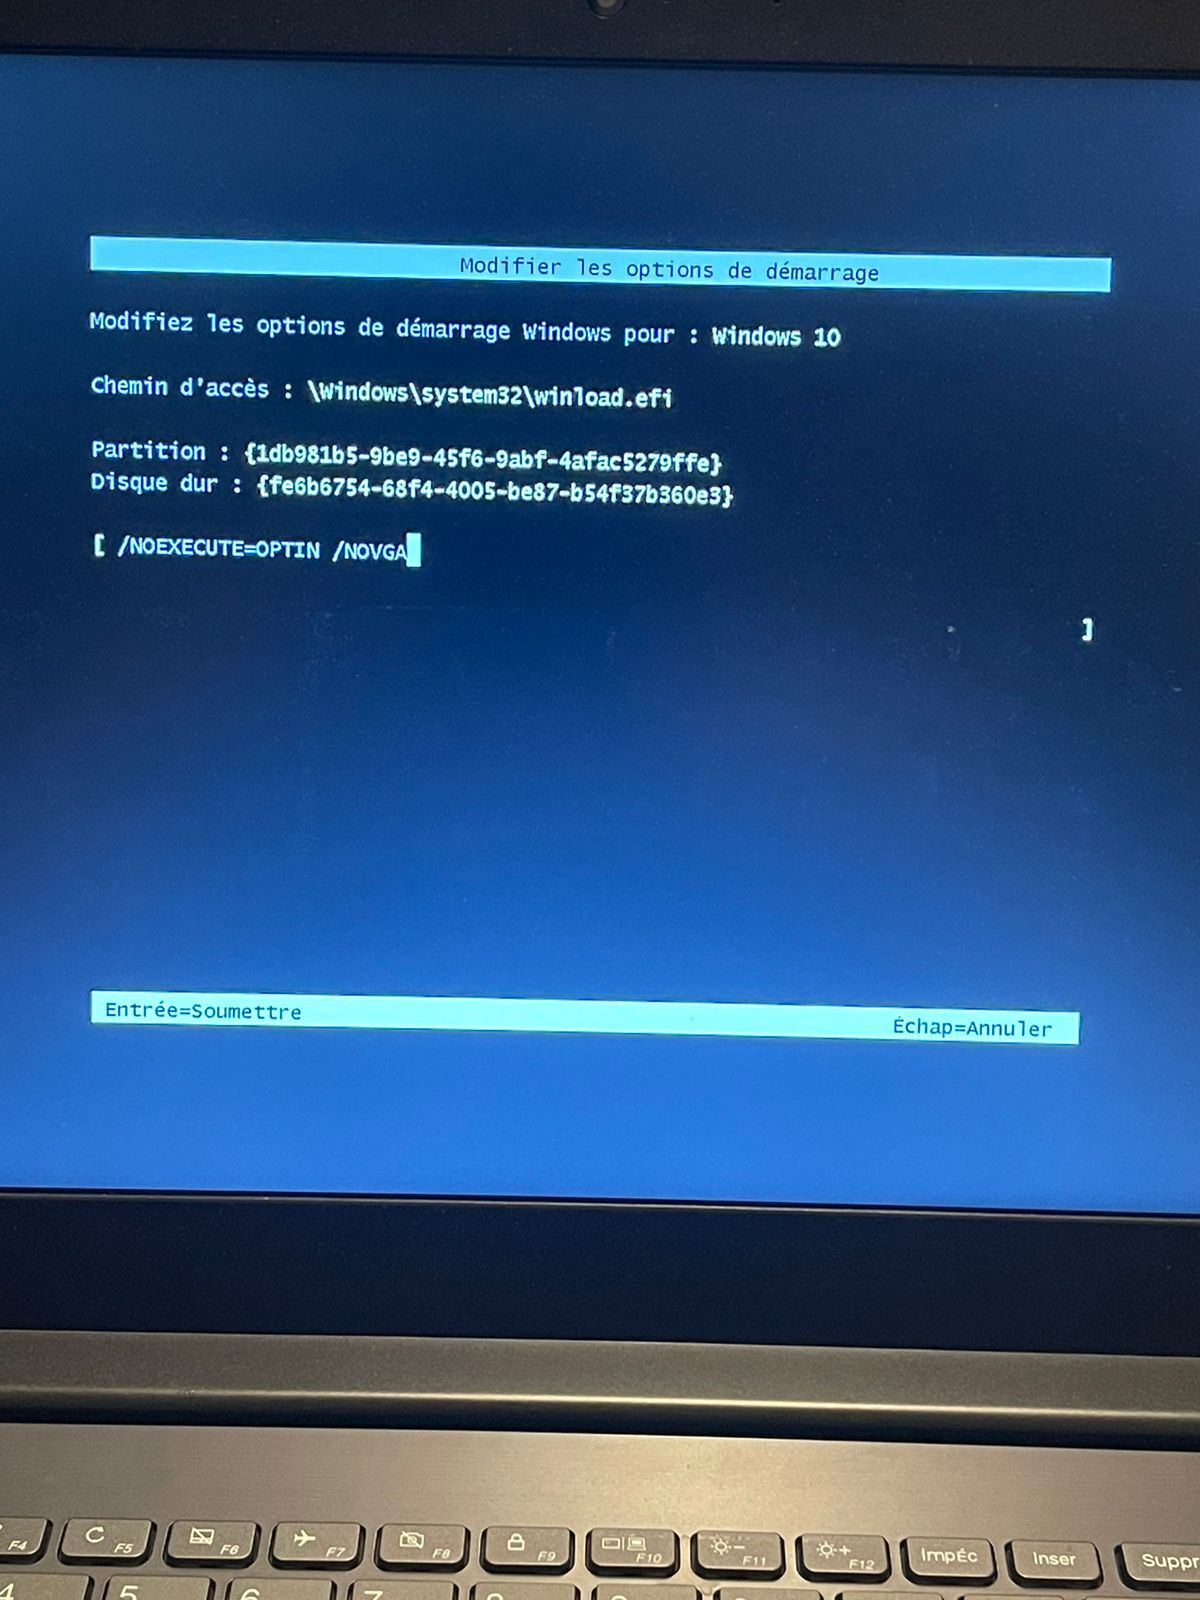 Problem-with-my-lenovo-stuck-in-the-boot -manager-and-the-keyboard-won-t-work-to-boot-it - English Community - LENOVO  COMMUNITY